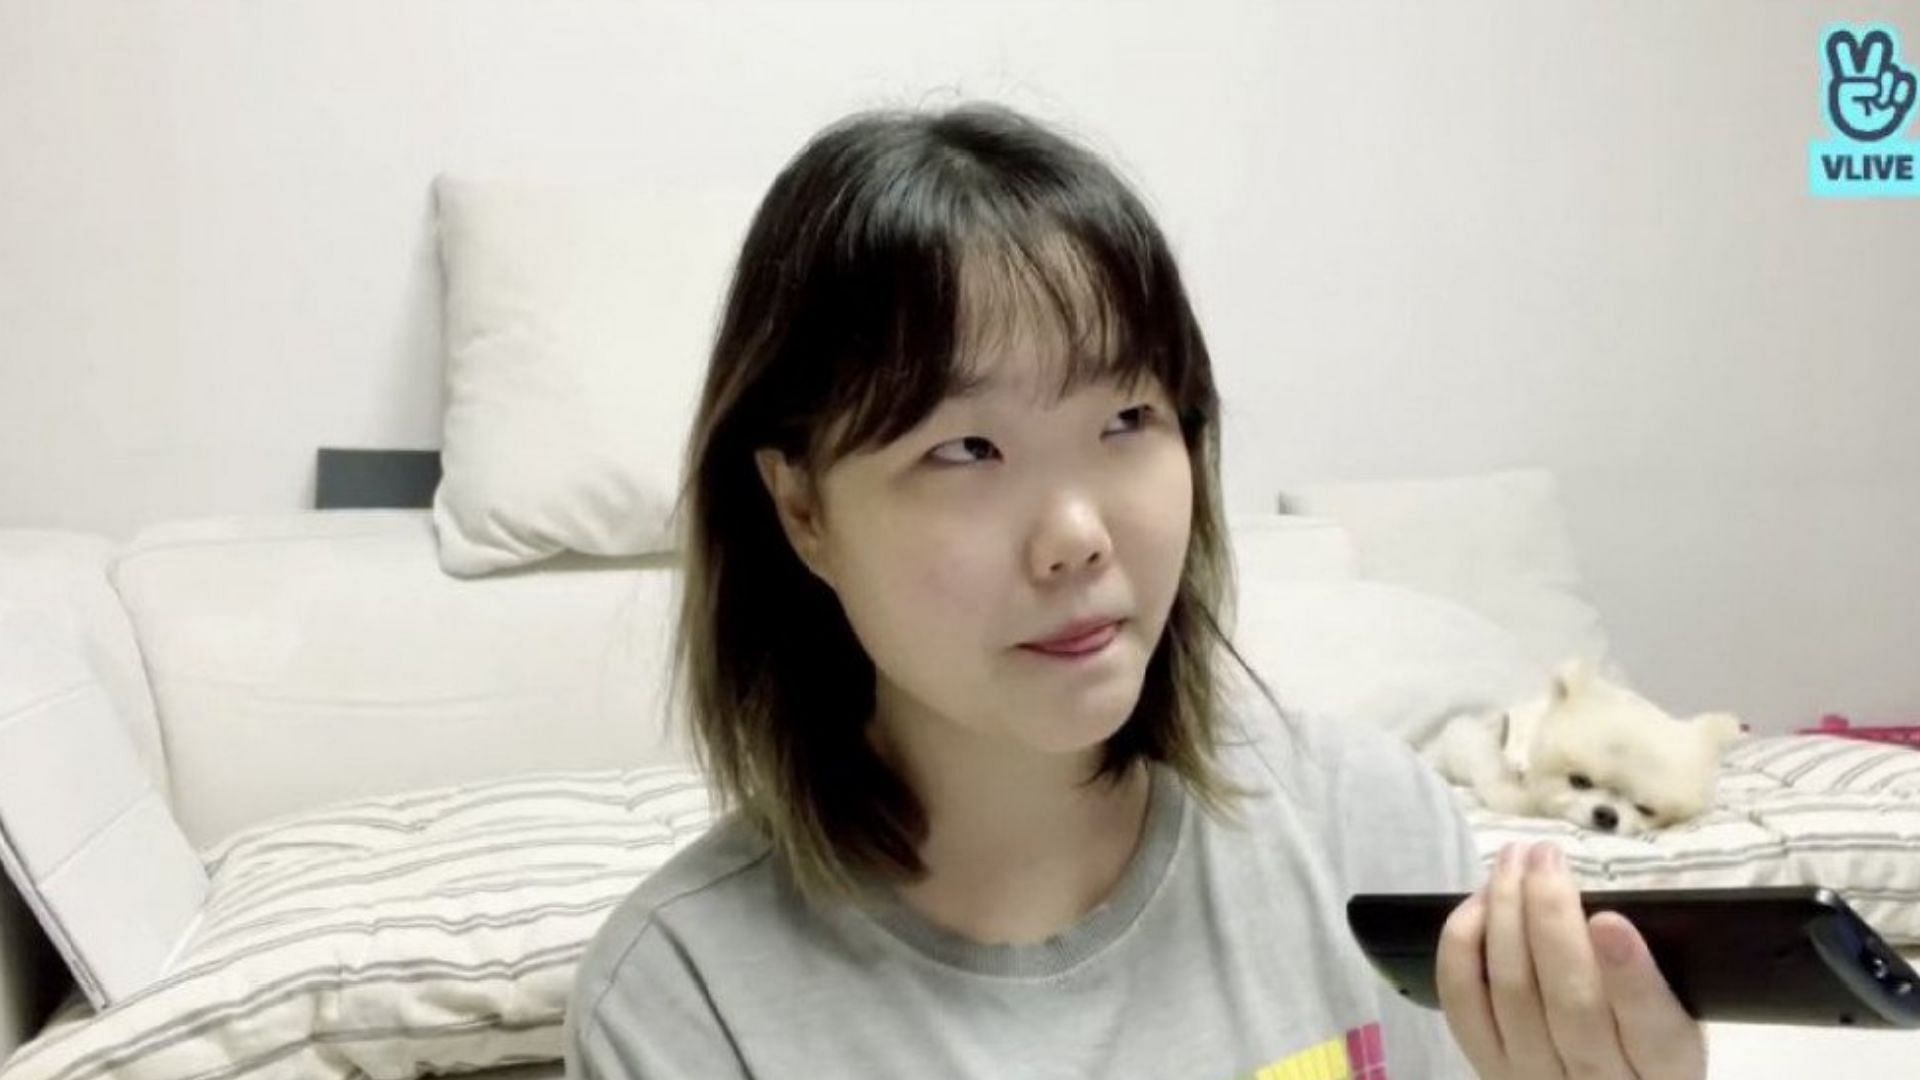 A screenshot of Lee Suhyun. From Vlive broadcast (Image via Vlive)